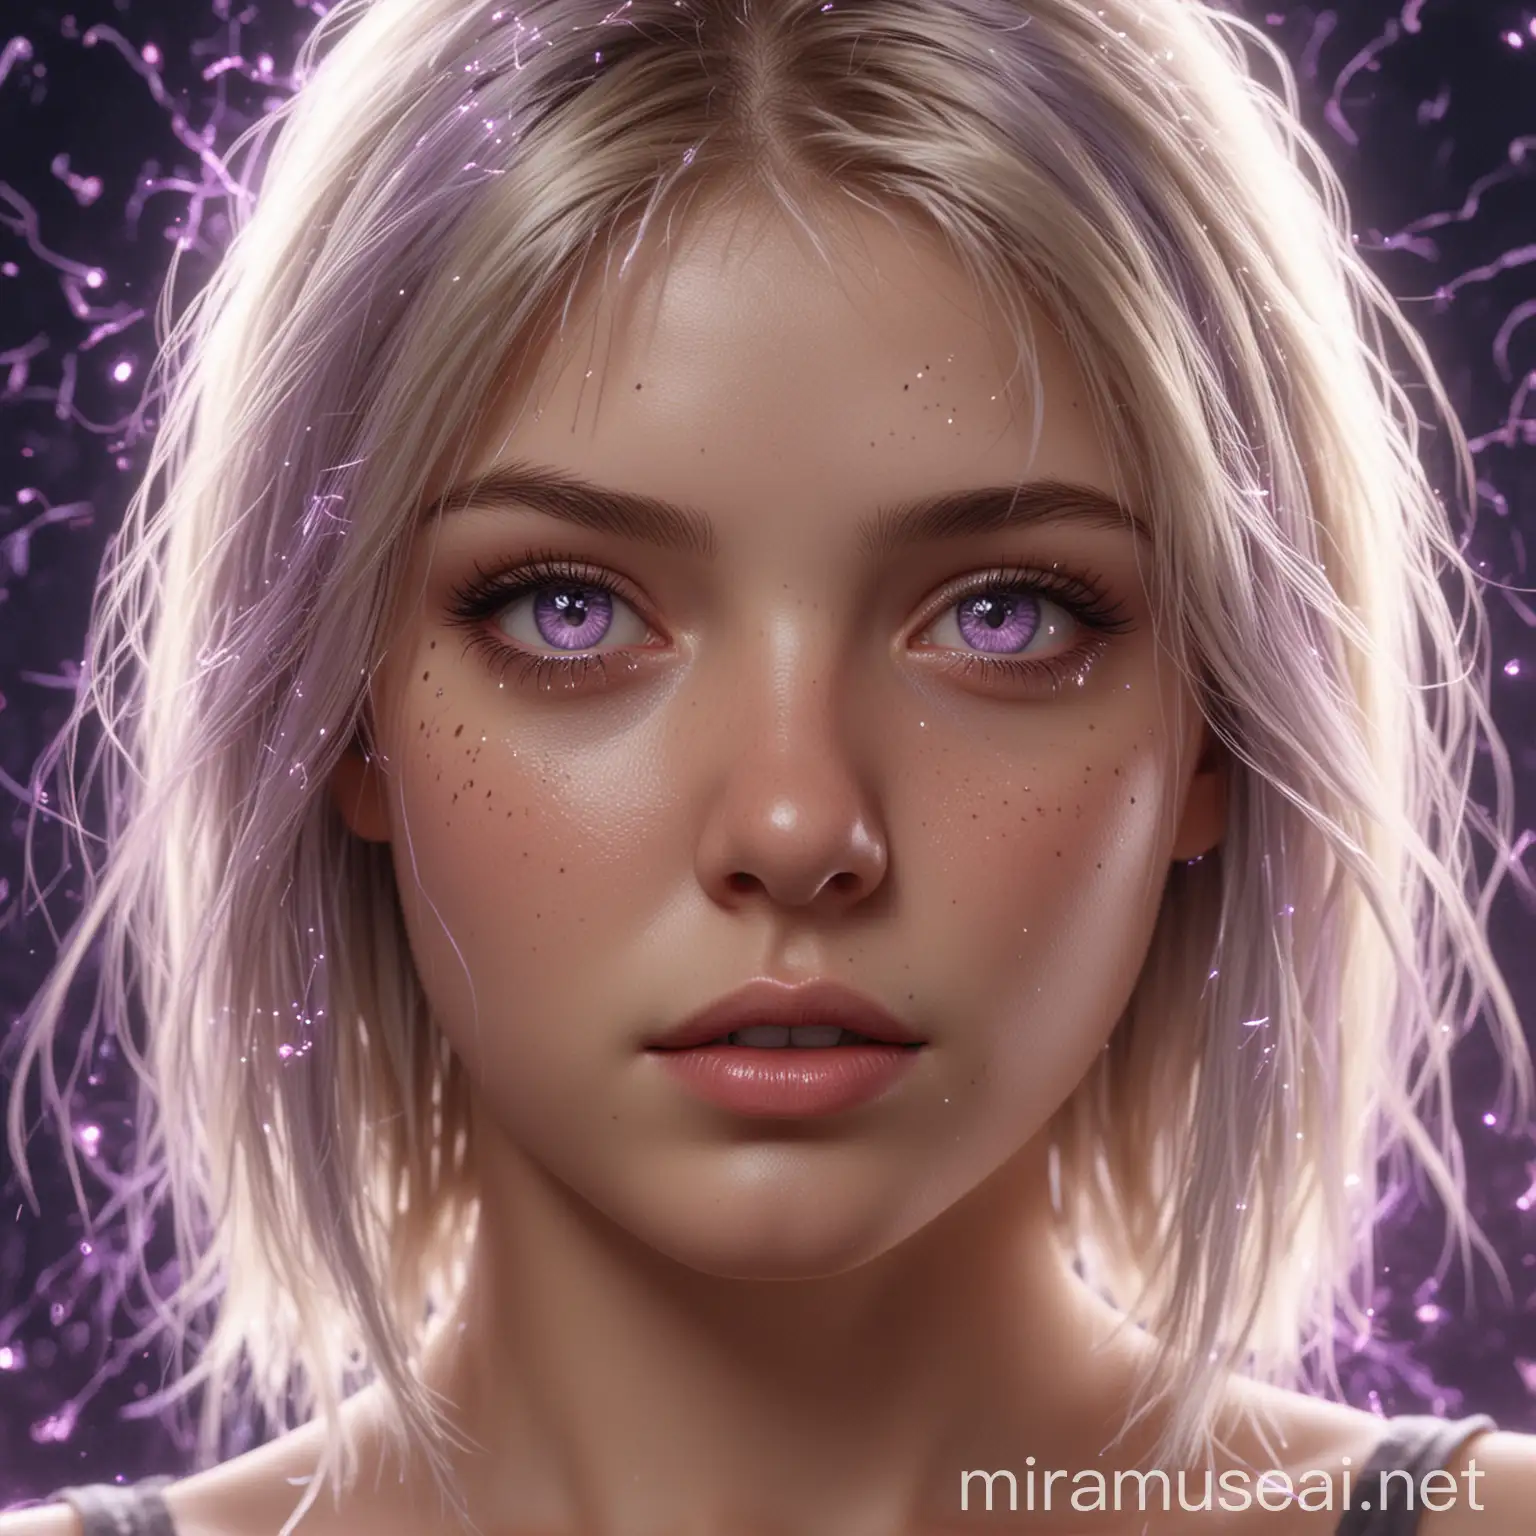 Hyper-realistic girl with smooth, straight blonde hair and light purple, almost lilac coloured eyes. Shes surrounded by sparks of electricity